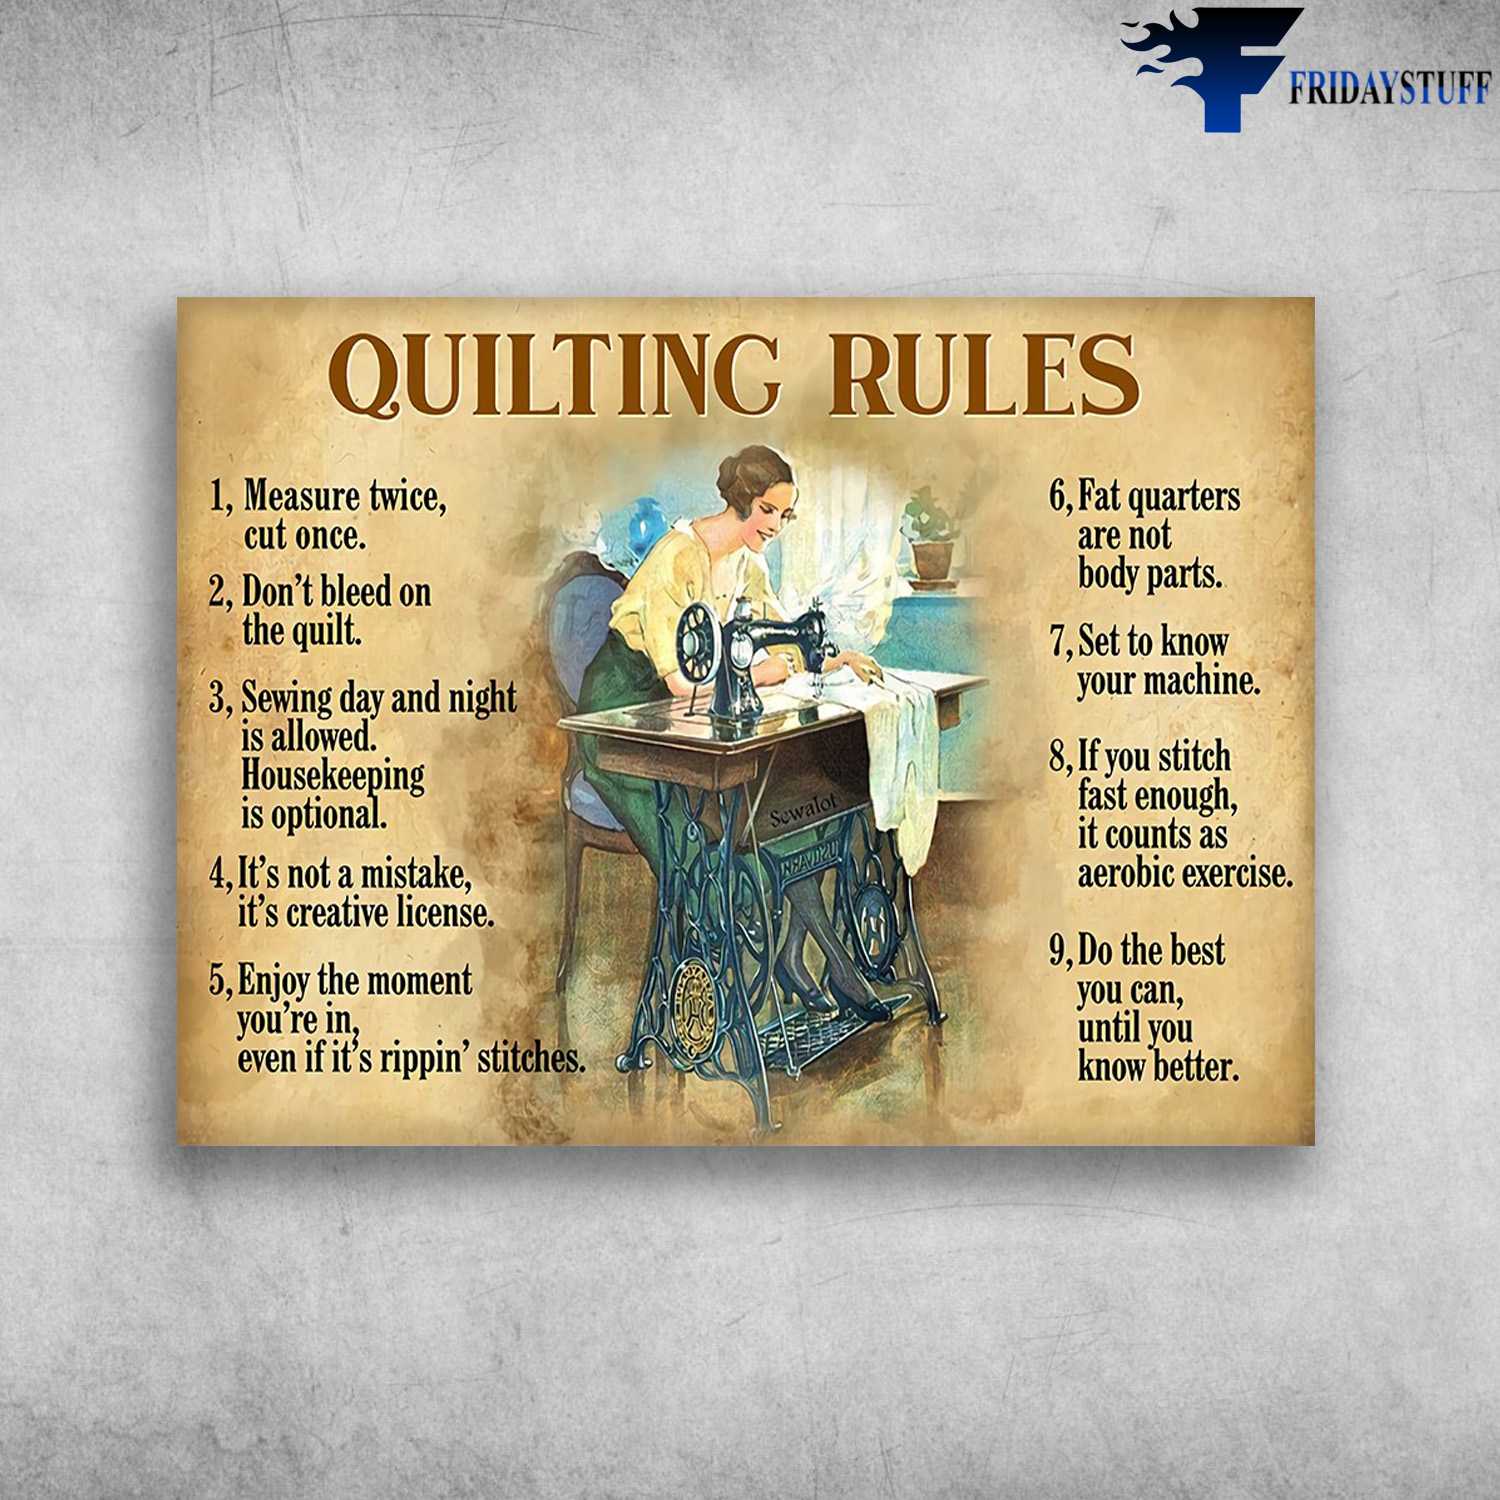 Quilting Rules - Measure Twice, Cut On, Don't Bleed On The Quit, Sewing Day And Night Is Allwed, Housekeeping Is Optional, Fat Quarters Are Not Body Parts, Sewing Girl